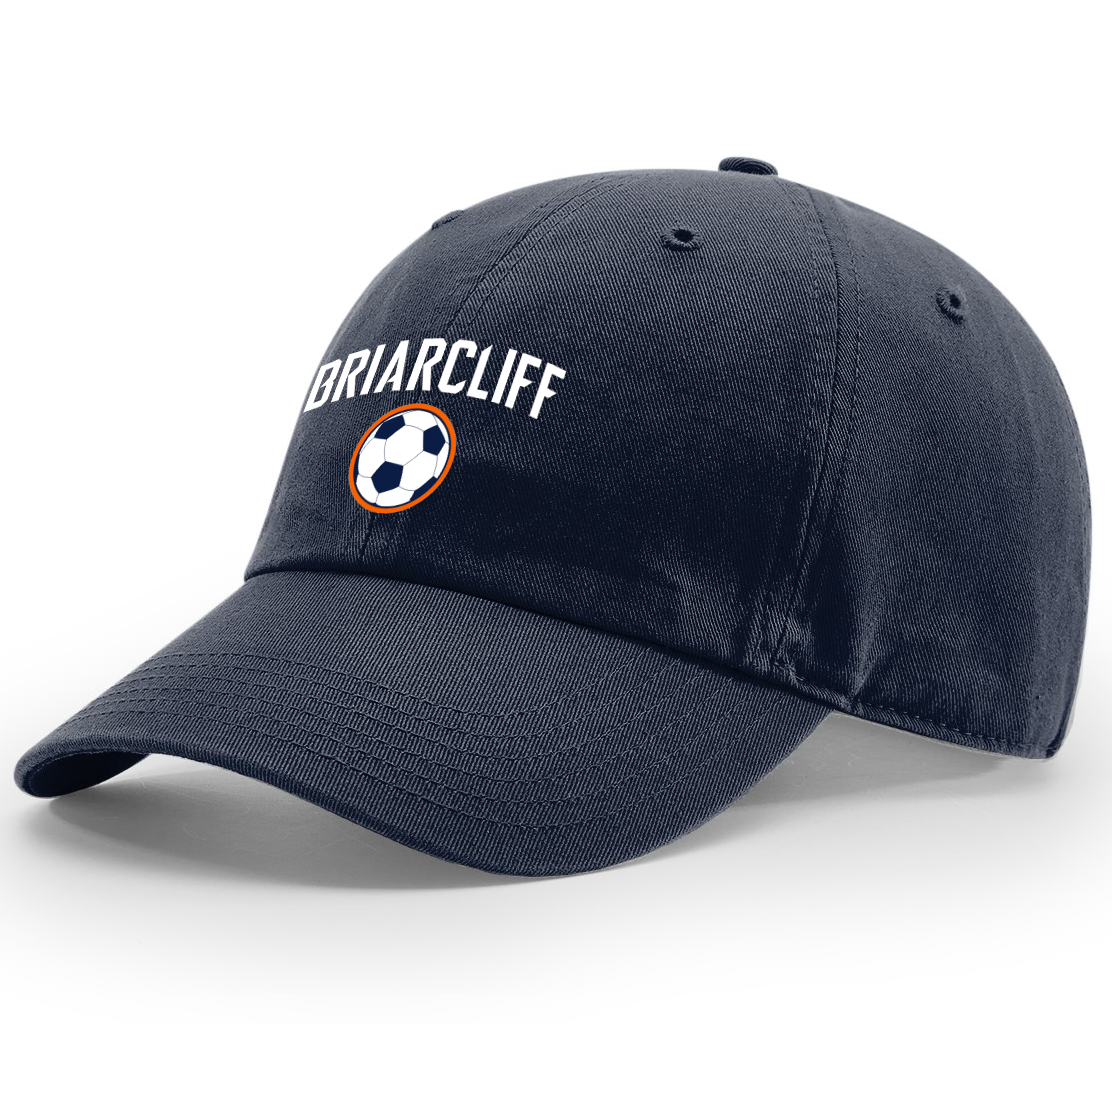 Briarcliff Soccer Richardson Washed Chino Cap